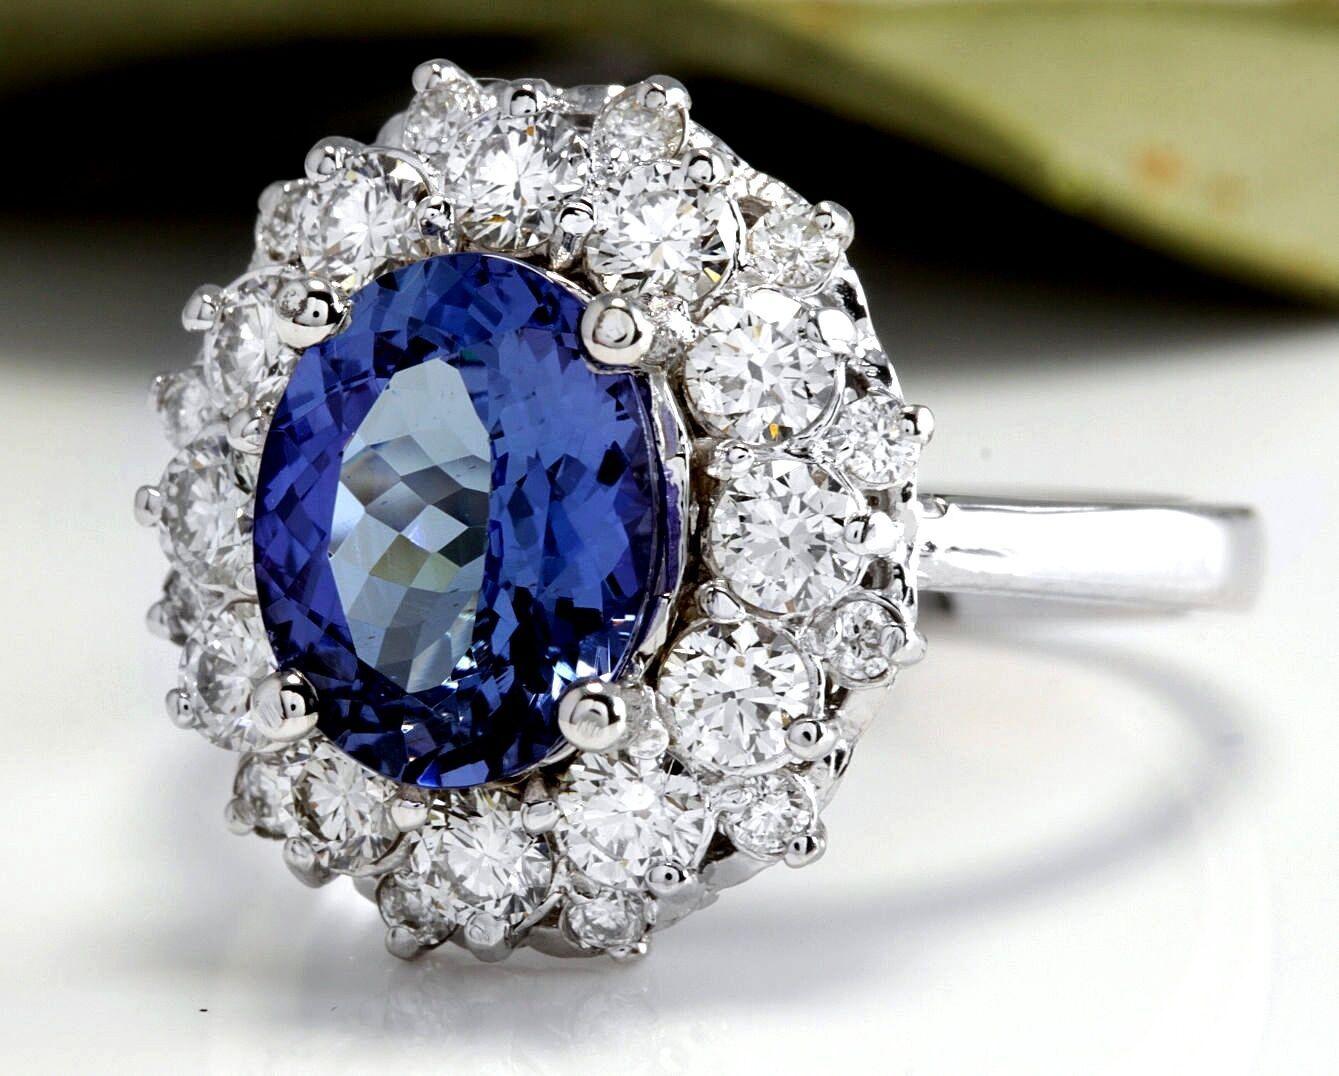 4.80 Carats Natural Very Nice Looking Tanzanite and Diamond 14K Solid White Gold Ring

Total Natural Oval Cut Tanzanite Weight is: 3.50 Carats

Tanzanite Measures: 7.00 x 9.00mm

Natural Round Diamonds Weight: 1.30 Carats (color G-H / Clarity